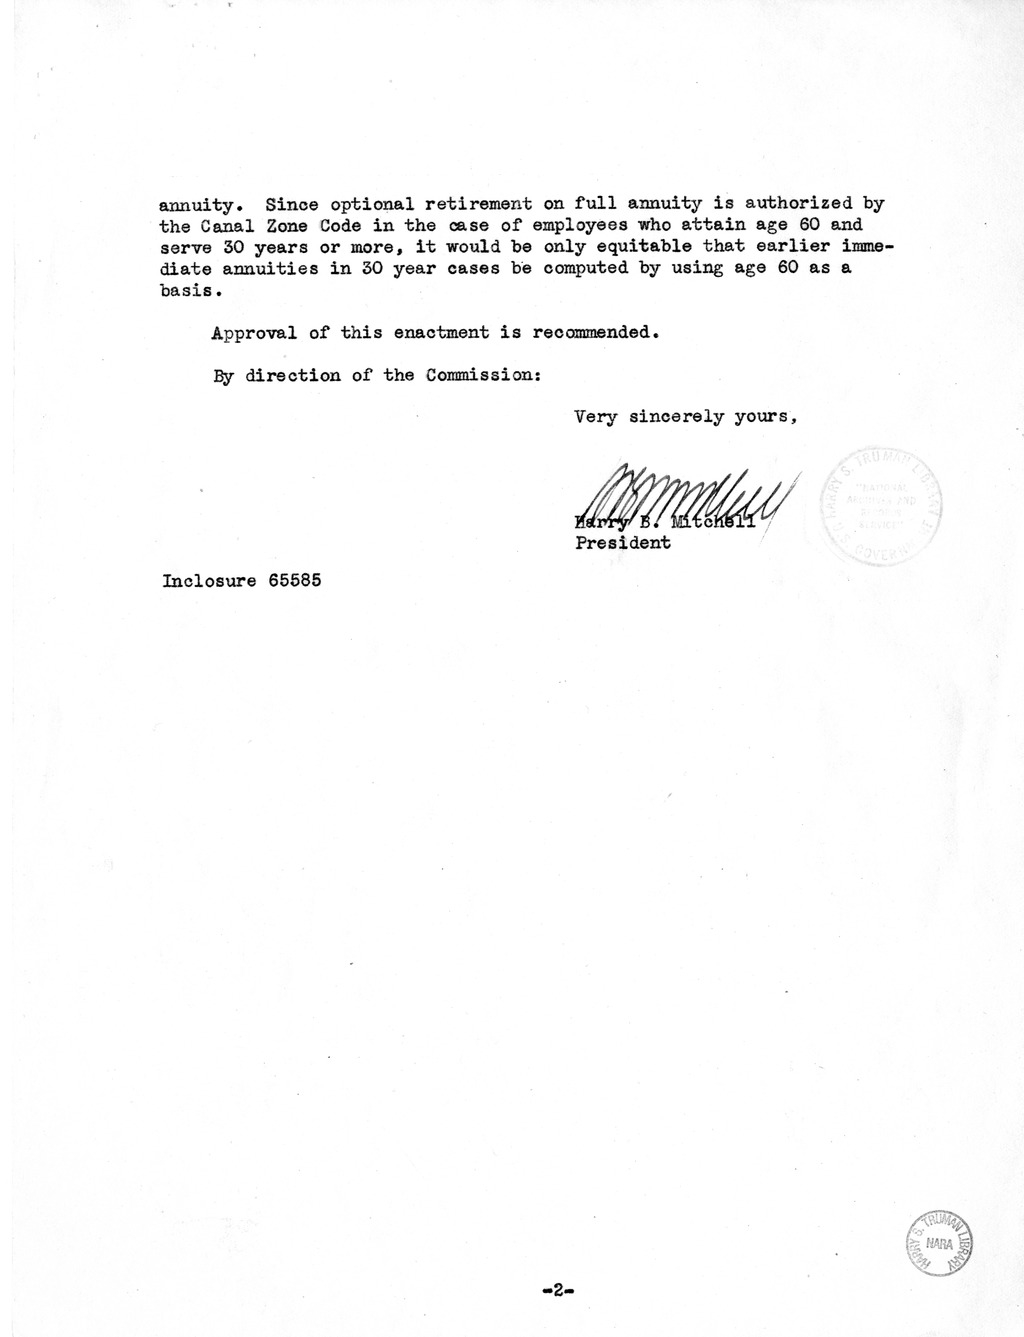 Memorandum from Harold D. Smith to M. C. Latta, H.R. 2125, To Amend the Canal Zone Code, with Attachments